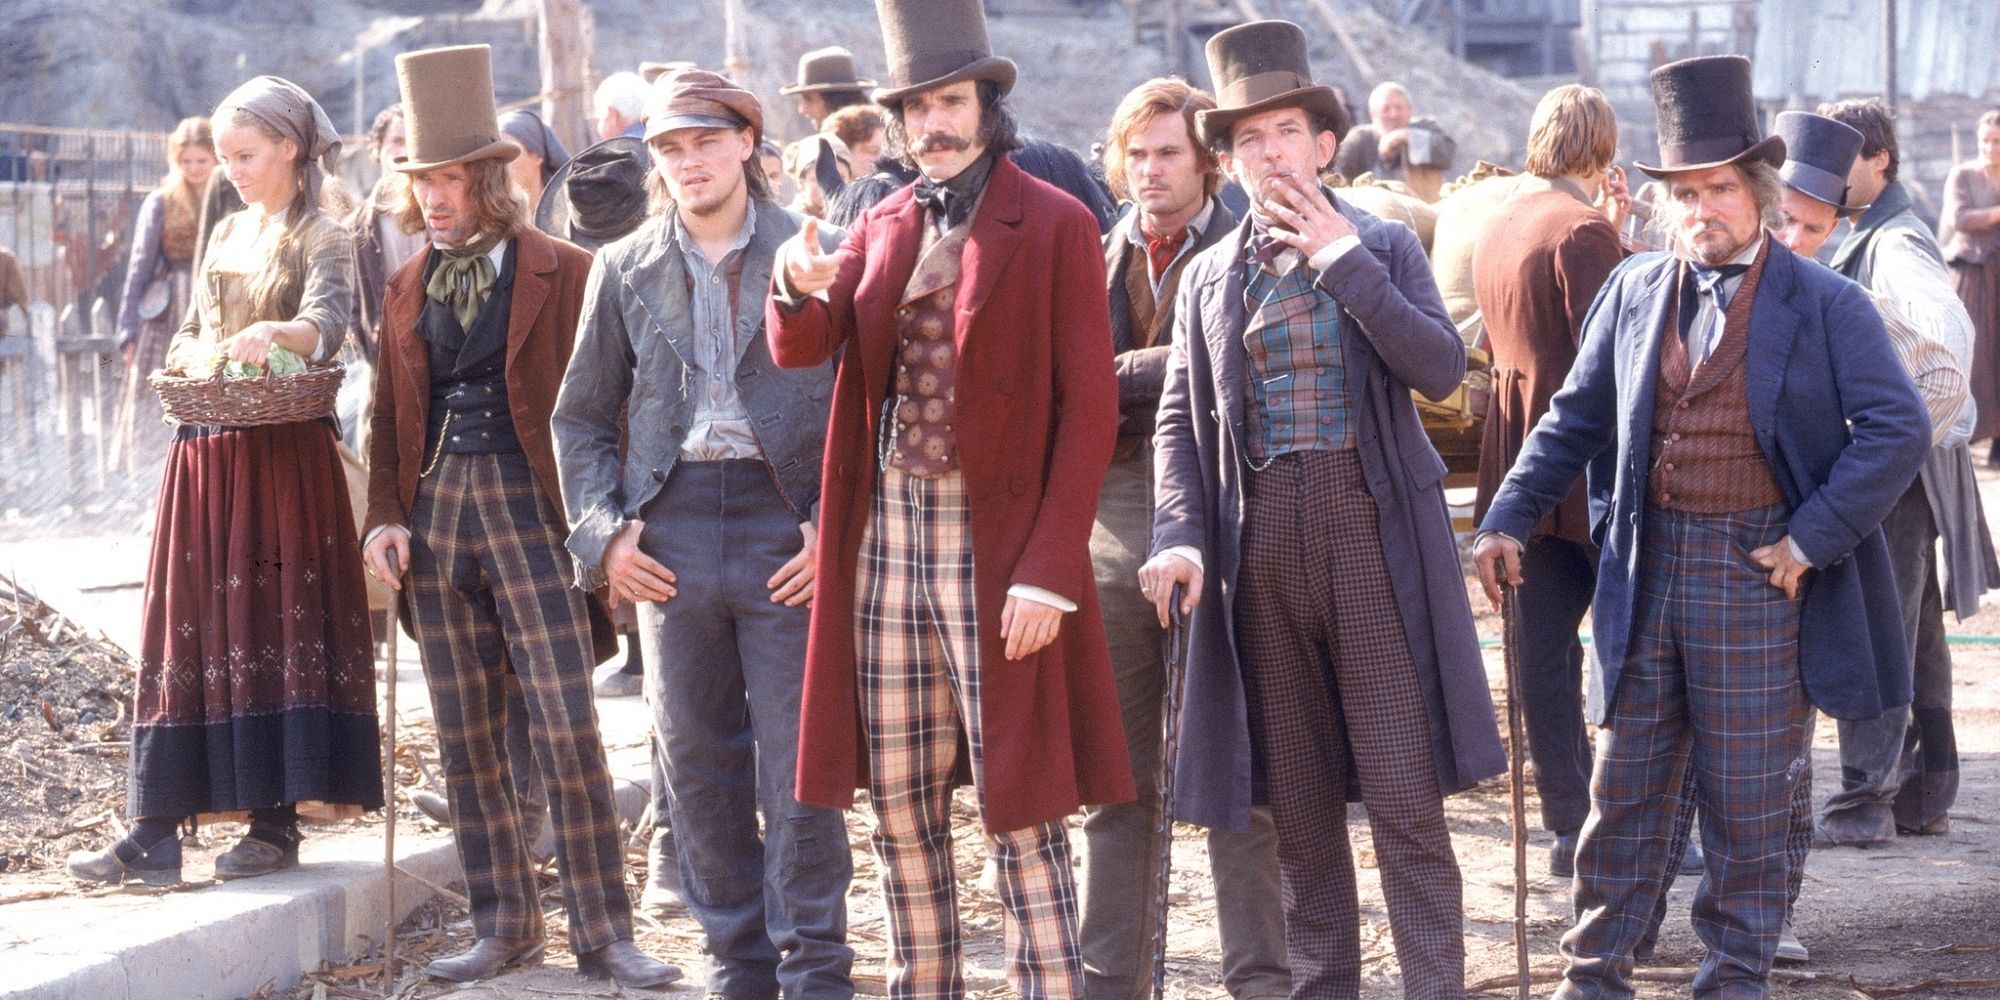 Official image of Gangs of New York (2002).